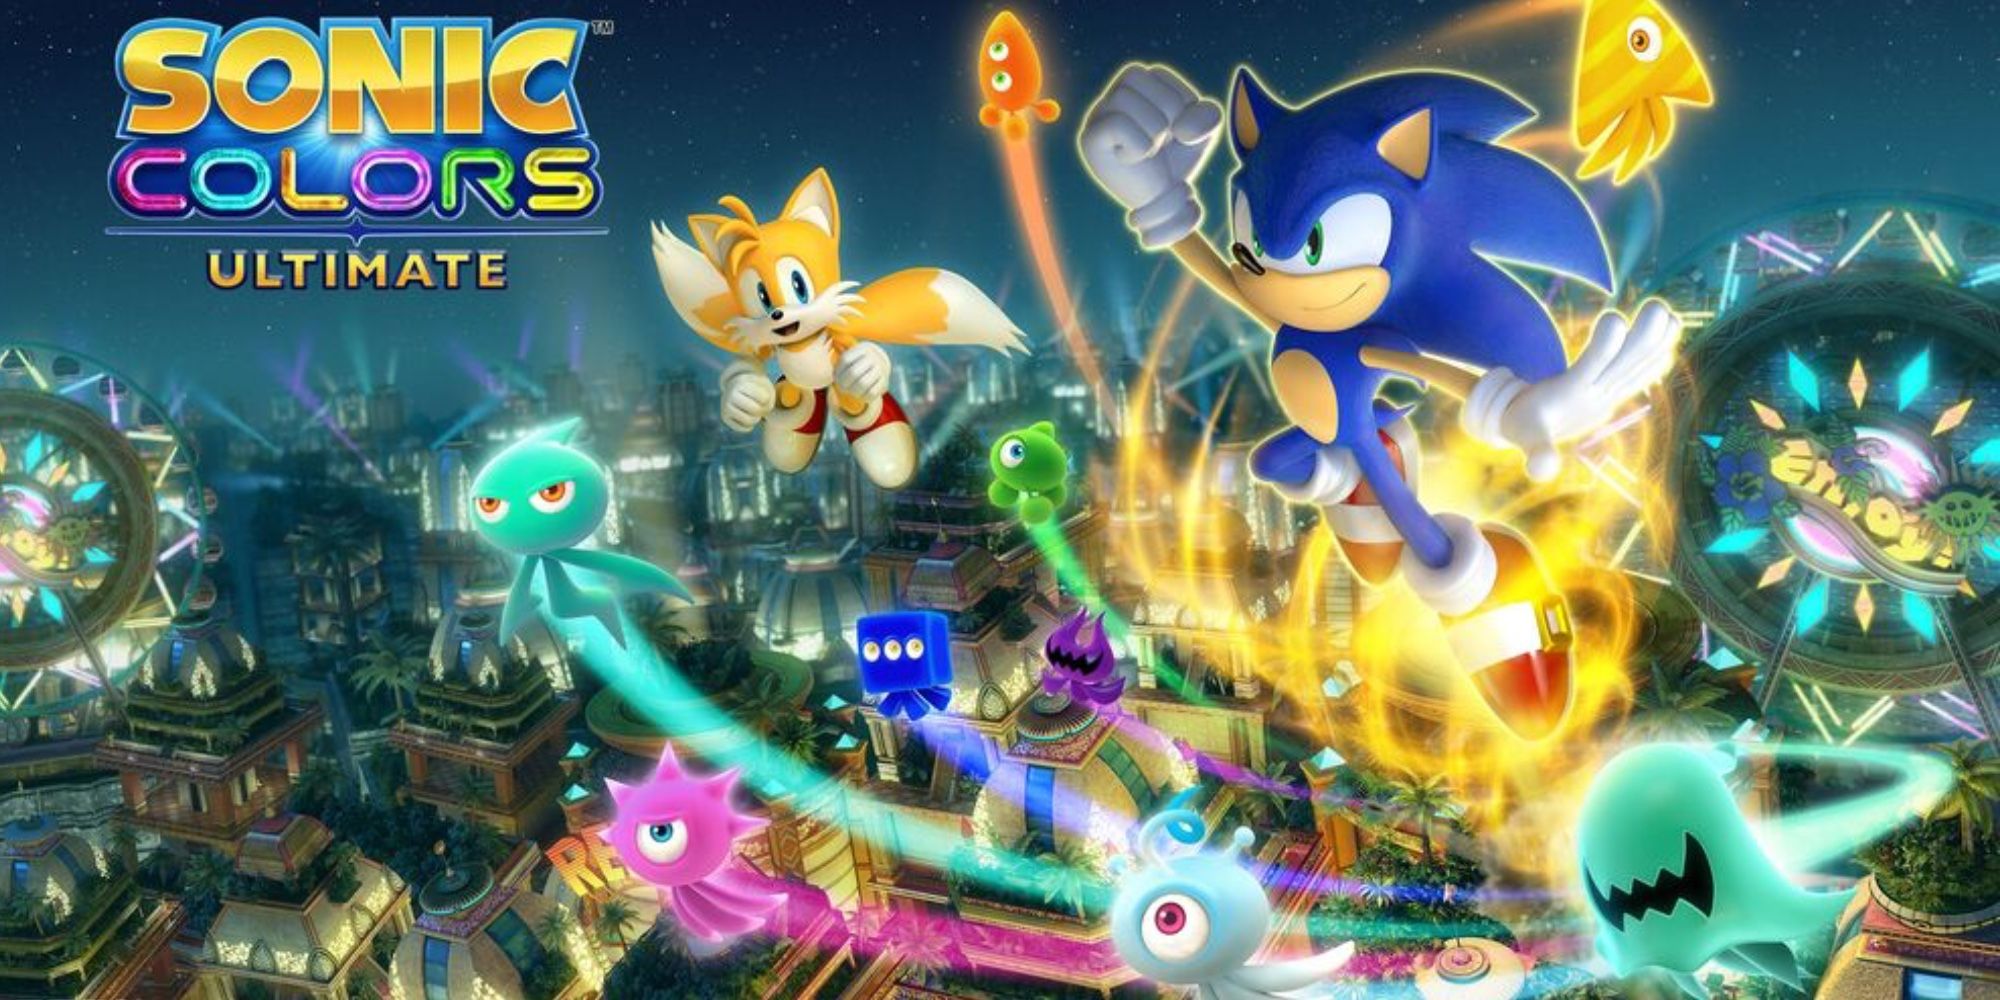 Sonic Colors: Ultimate - Sonic jumping through the skies with wisps